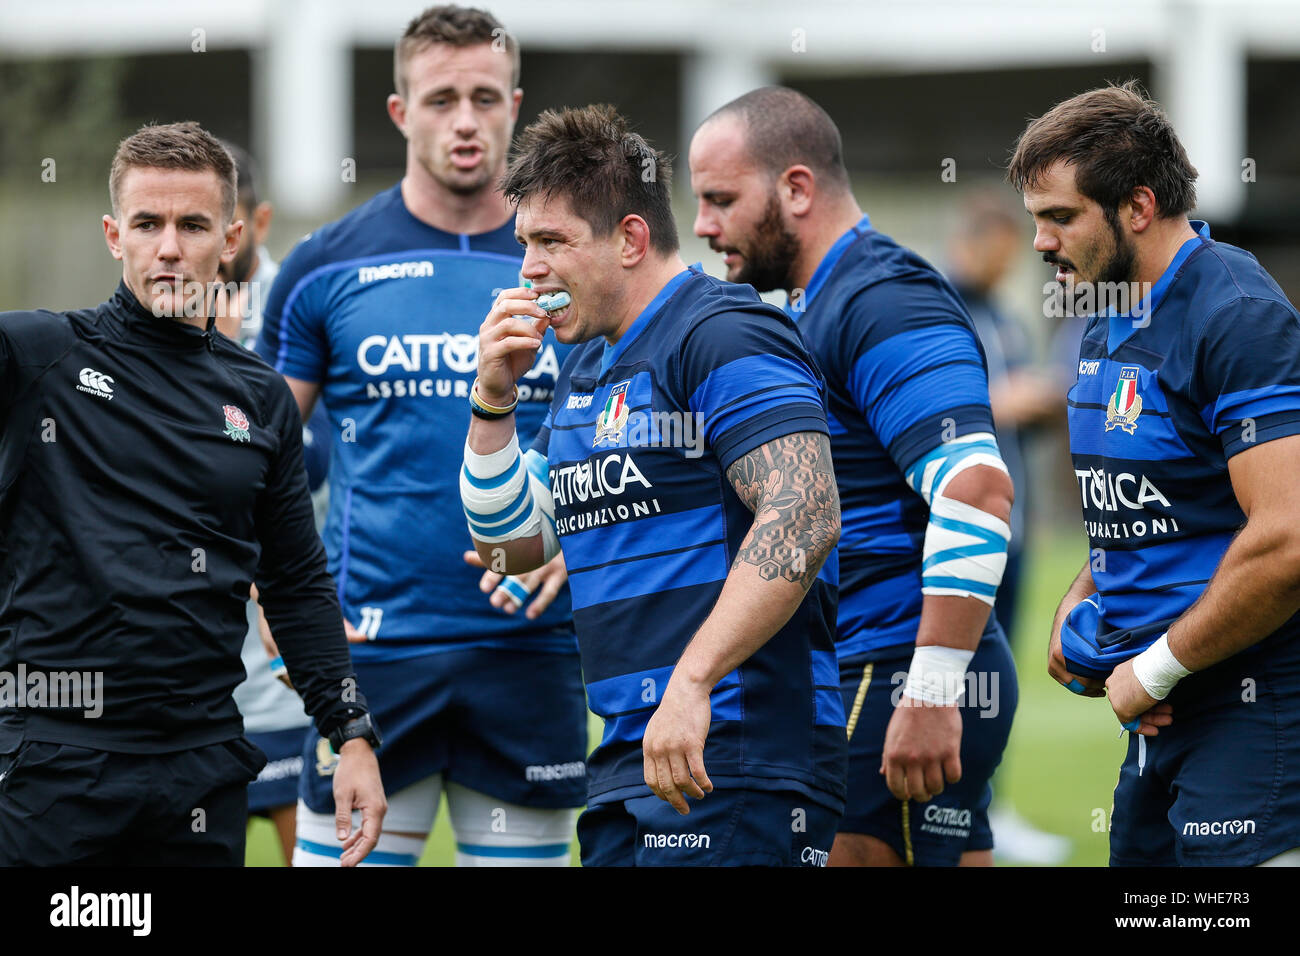 Newcastle, UK. 02nd Sep, 2019. NEWCASTLE UPON TYNE, ENGLAND SEPT 2ND Italian players prepare to pack down against Newcastle Falcons under the instructions of Referee, Luke Pearce during Italy's training session at Kingston Park, Newcastle on Monday 2nd September 2019. (Credit: Chris Lishman | MI News) Credit: MI News & Sport /Alamy Live News Stock Photo